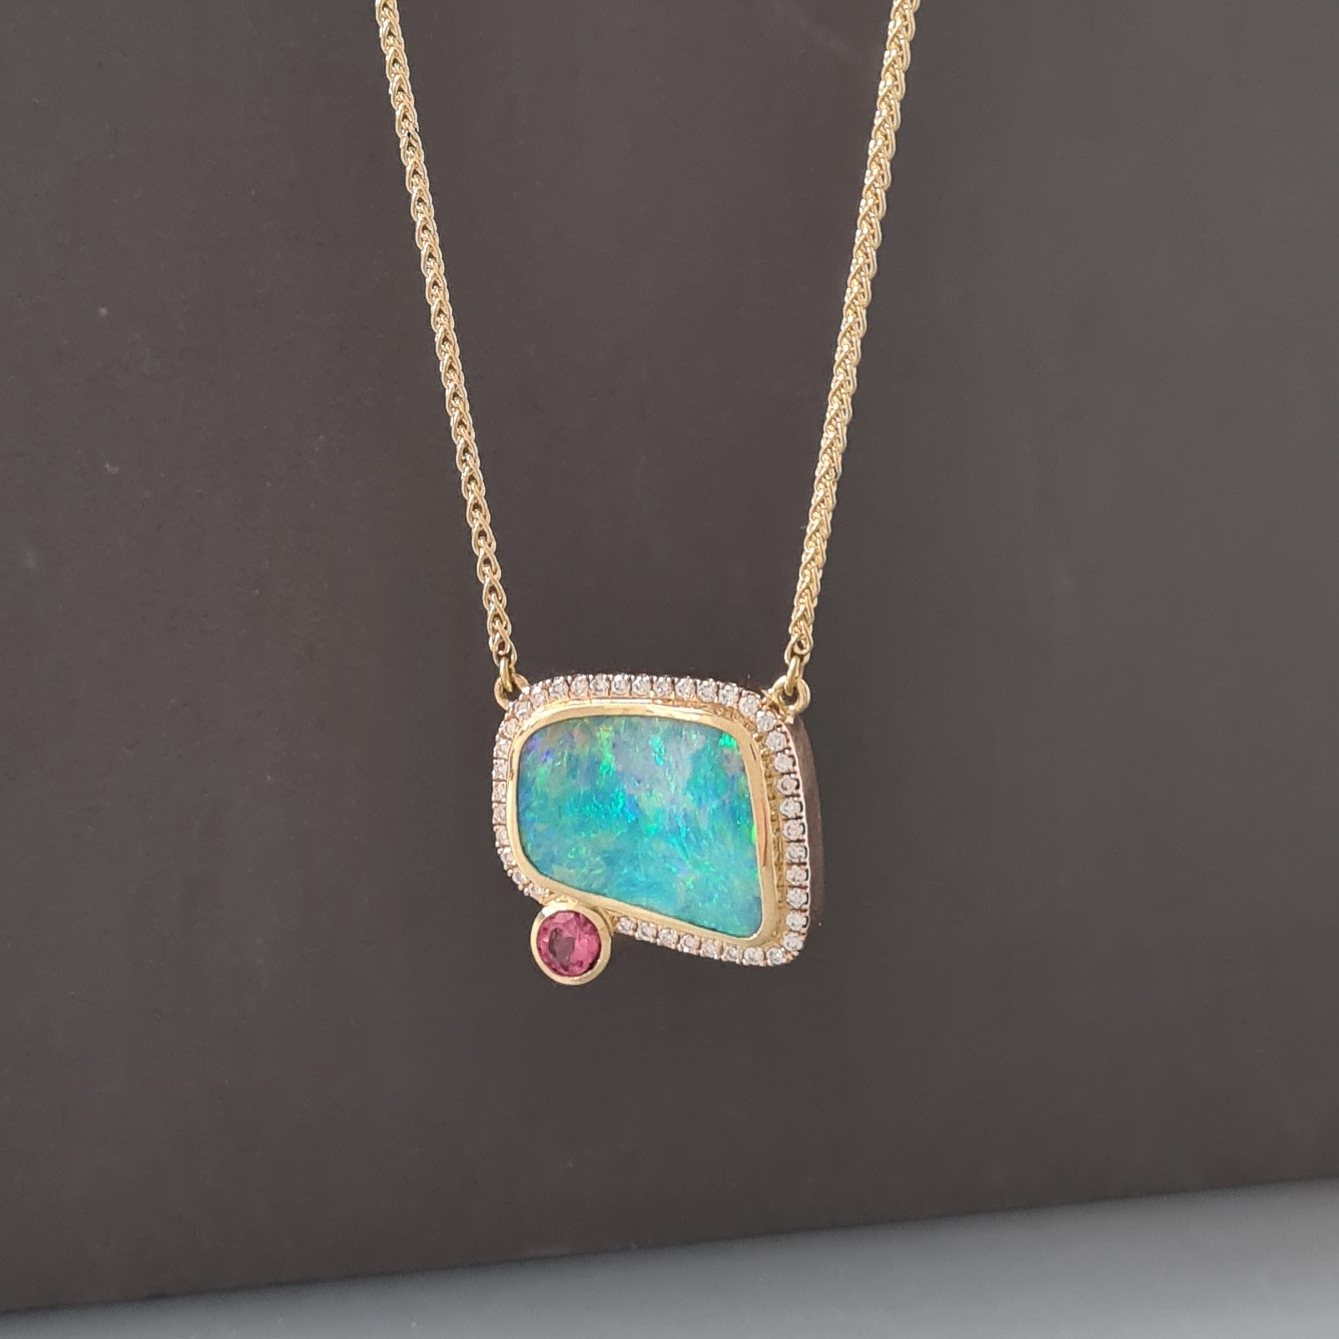 Boulder opal, diamond and padparadscha sapphire hanging on a gold chain on a dark grey background.